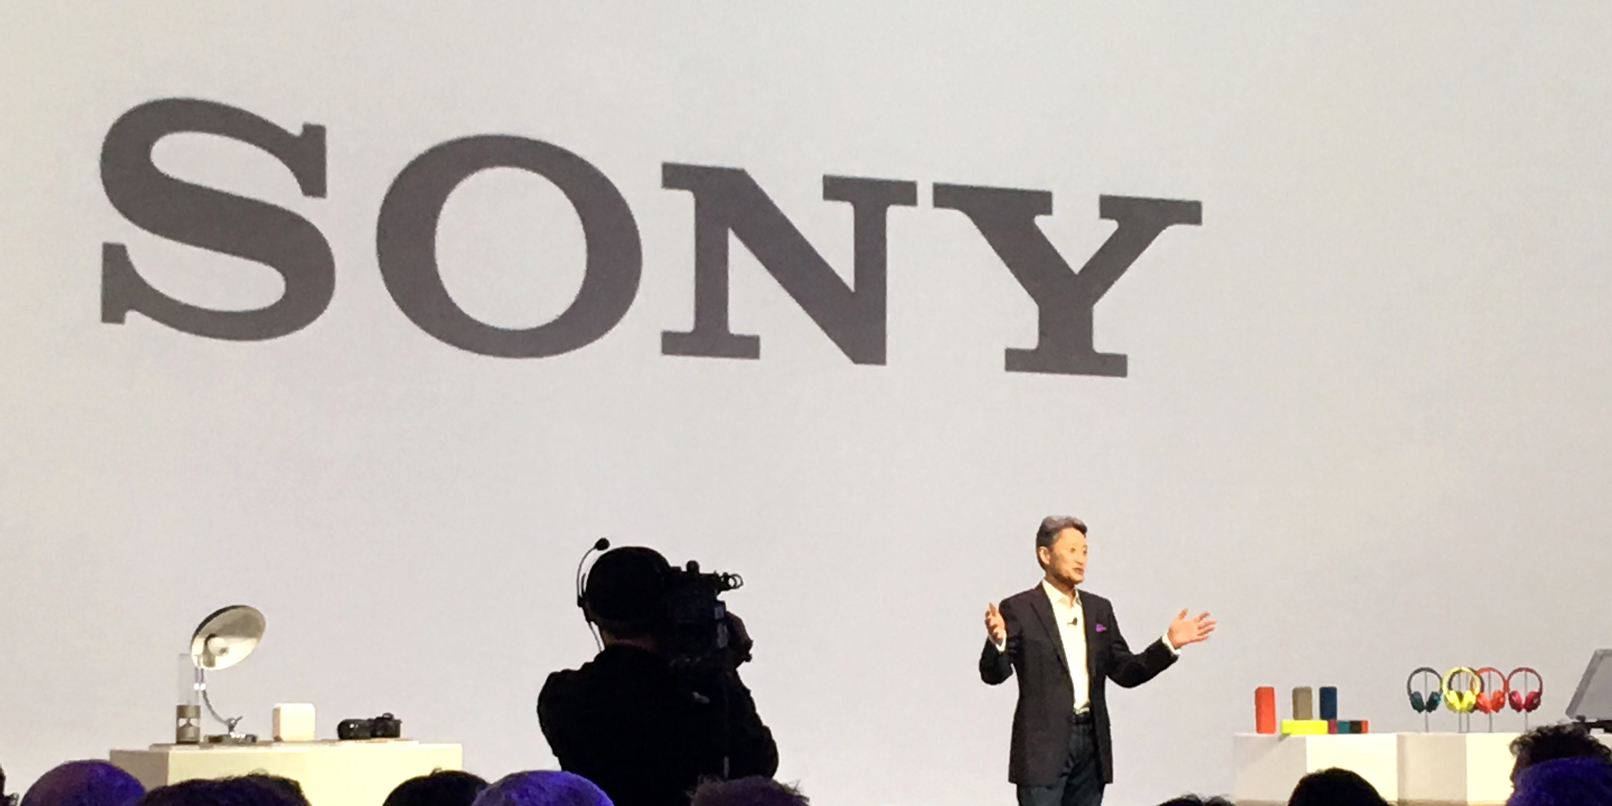 Sony at CES 2016